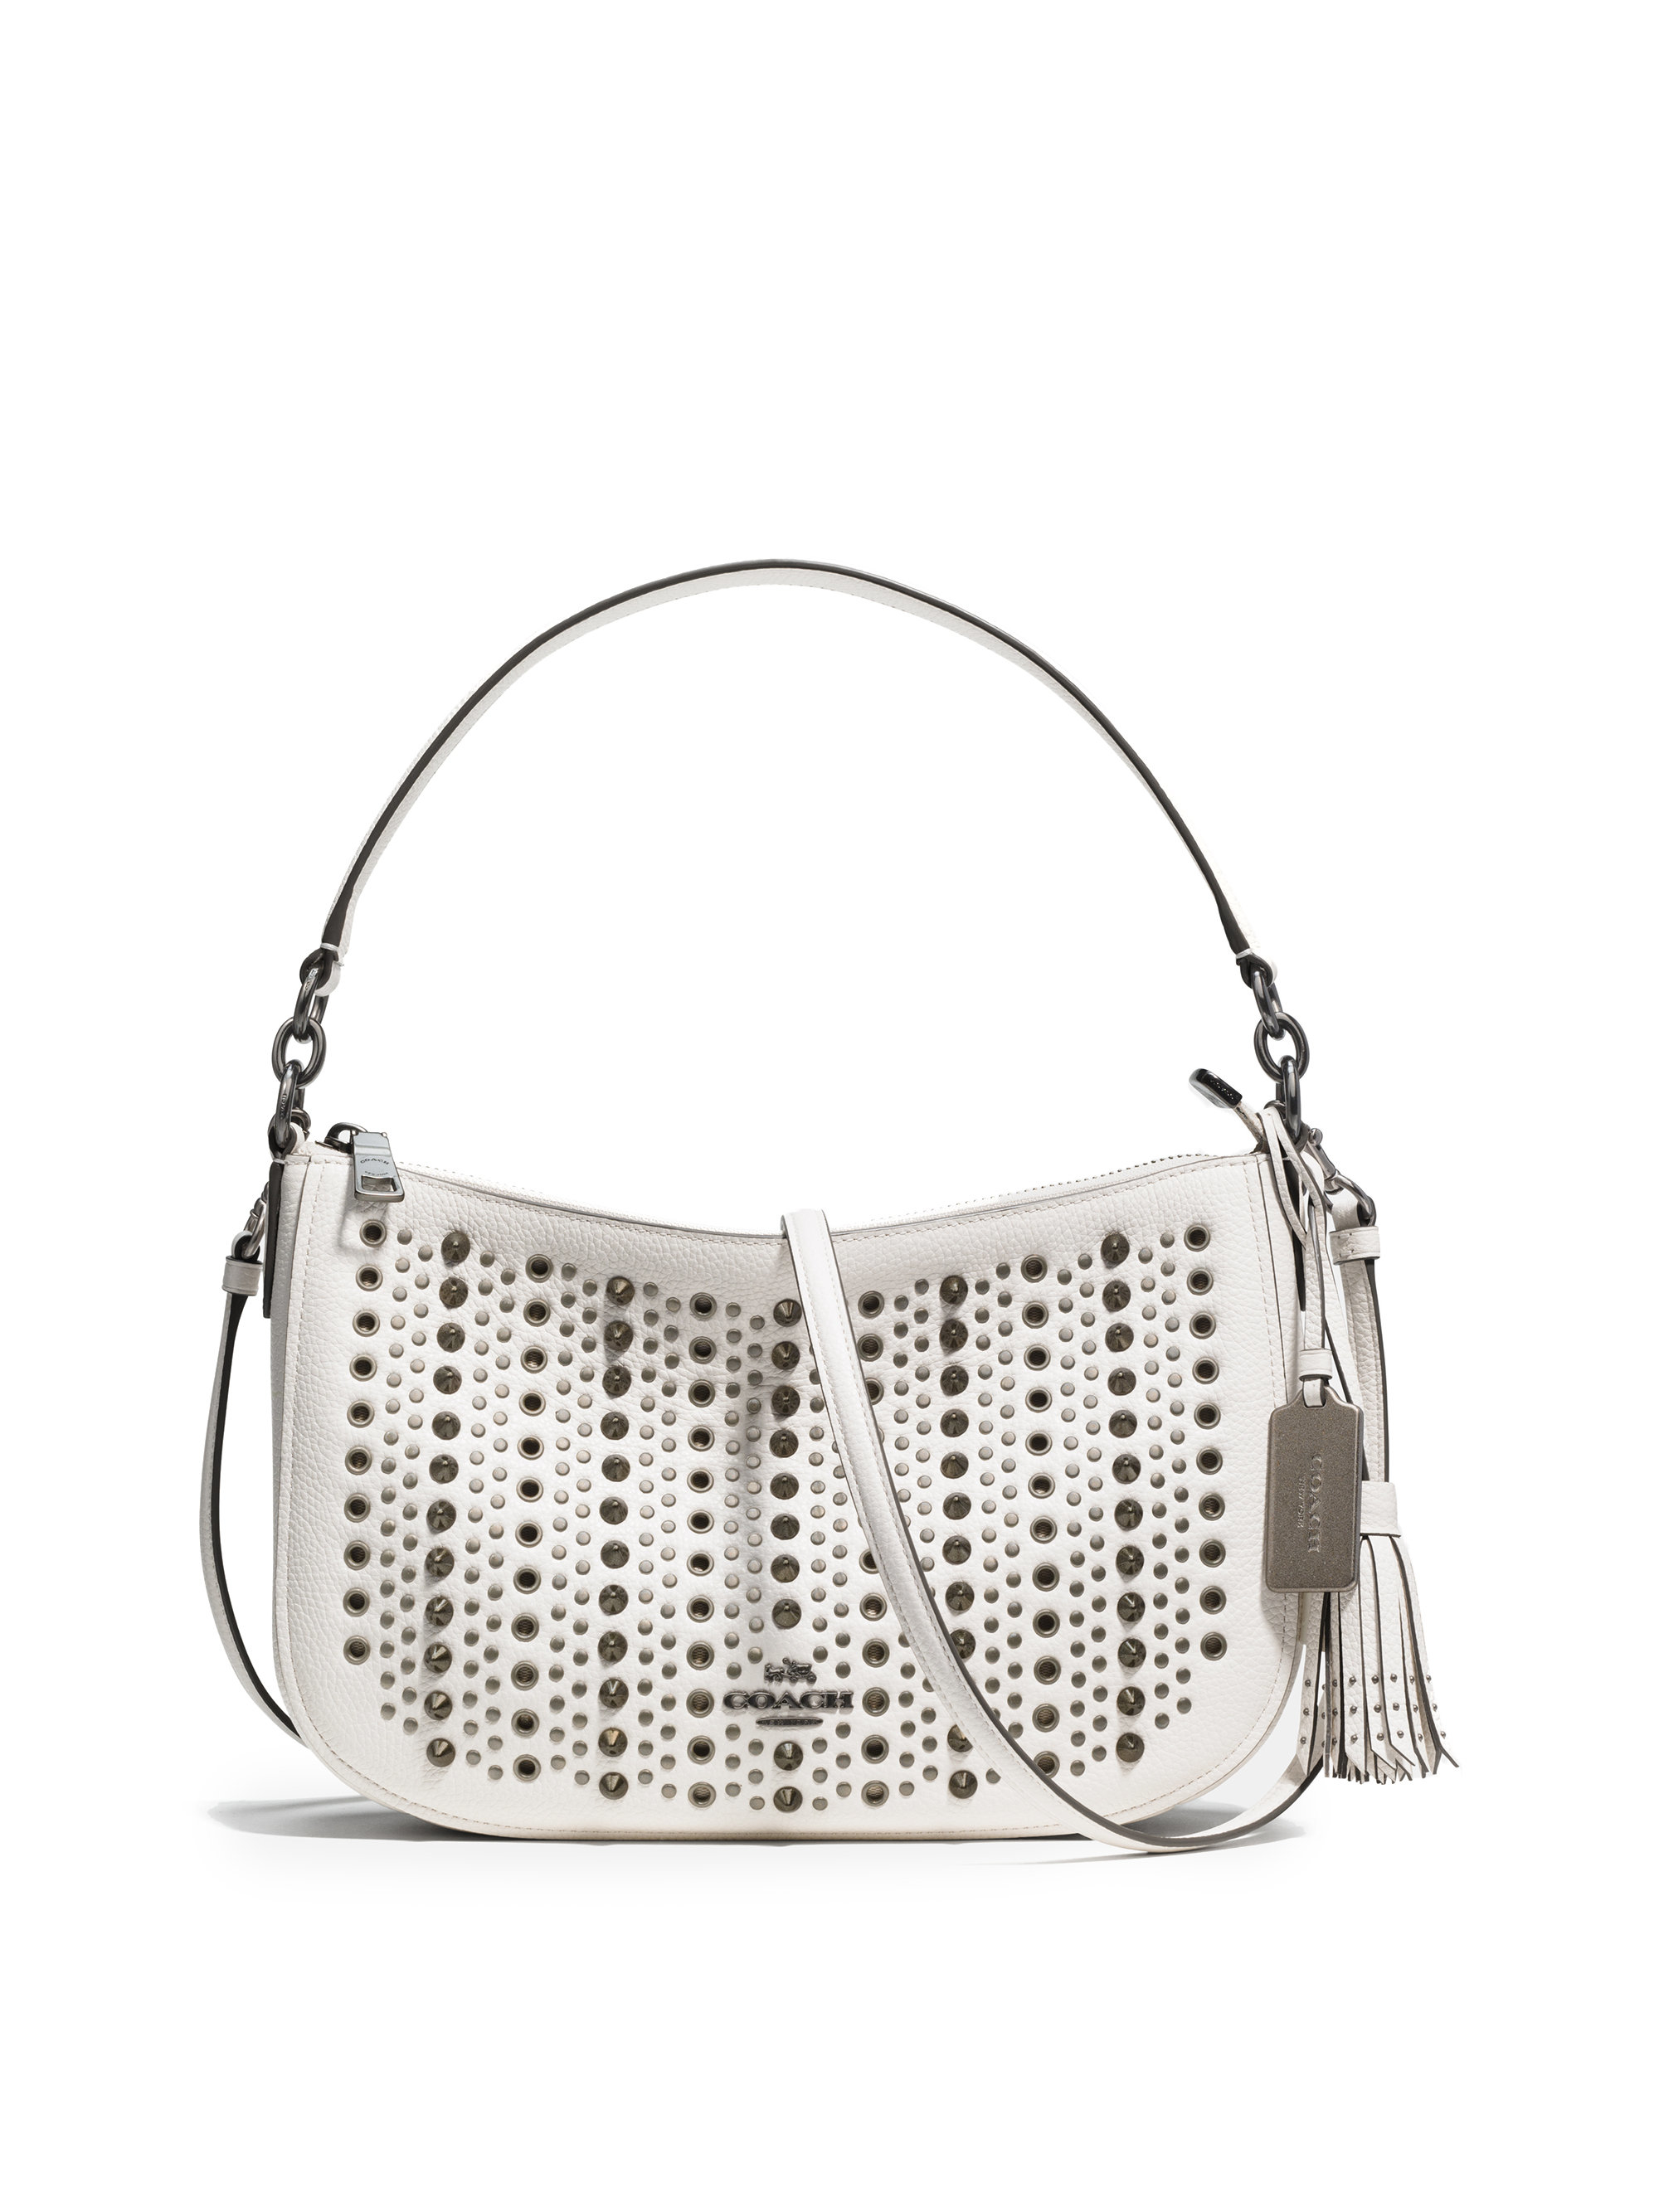 Lyst - Coach Chelsea Allover Studs Leather Crossbody Bag in White